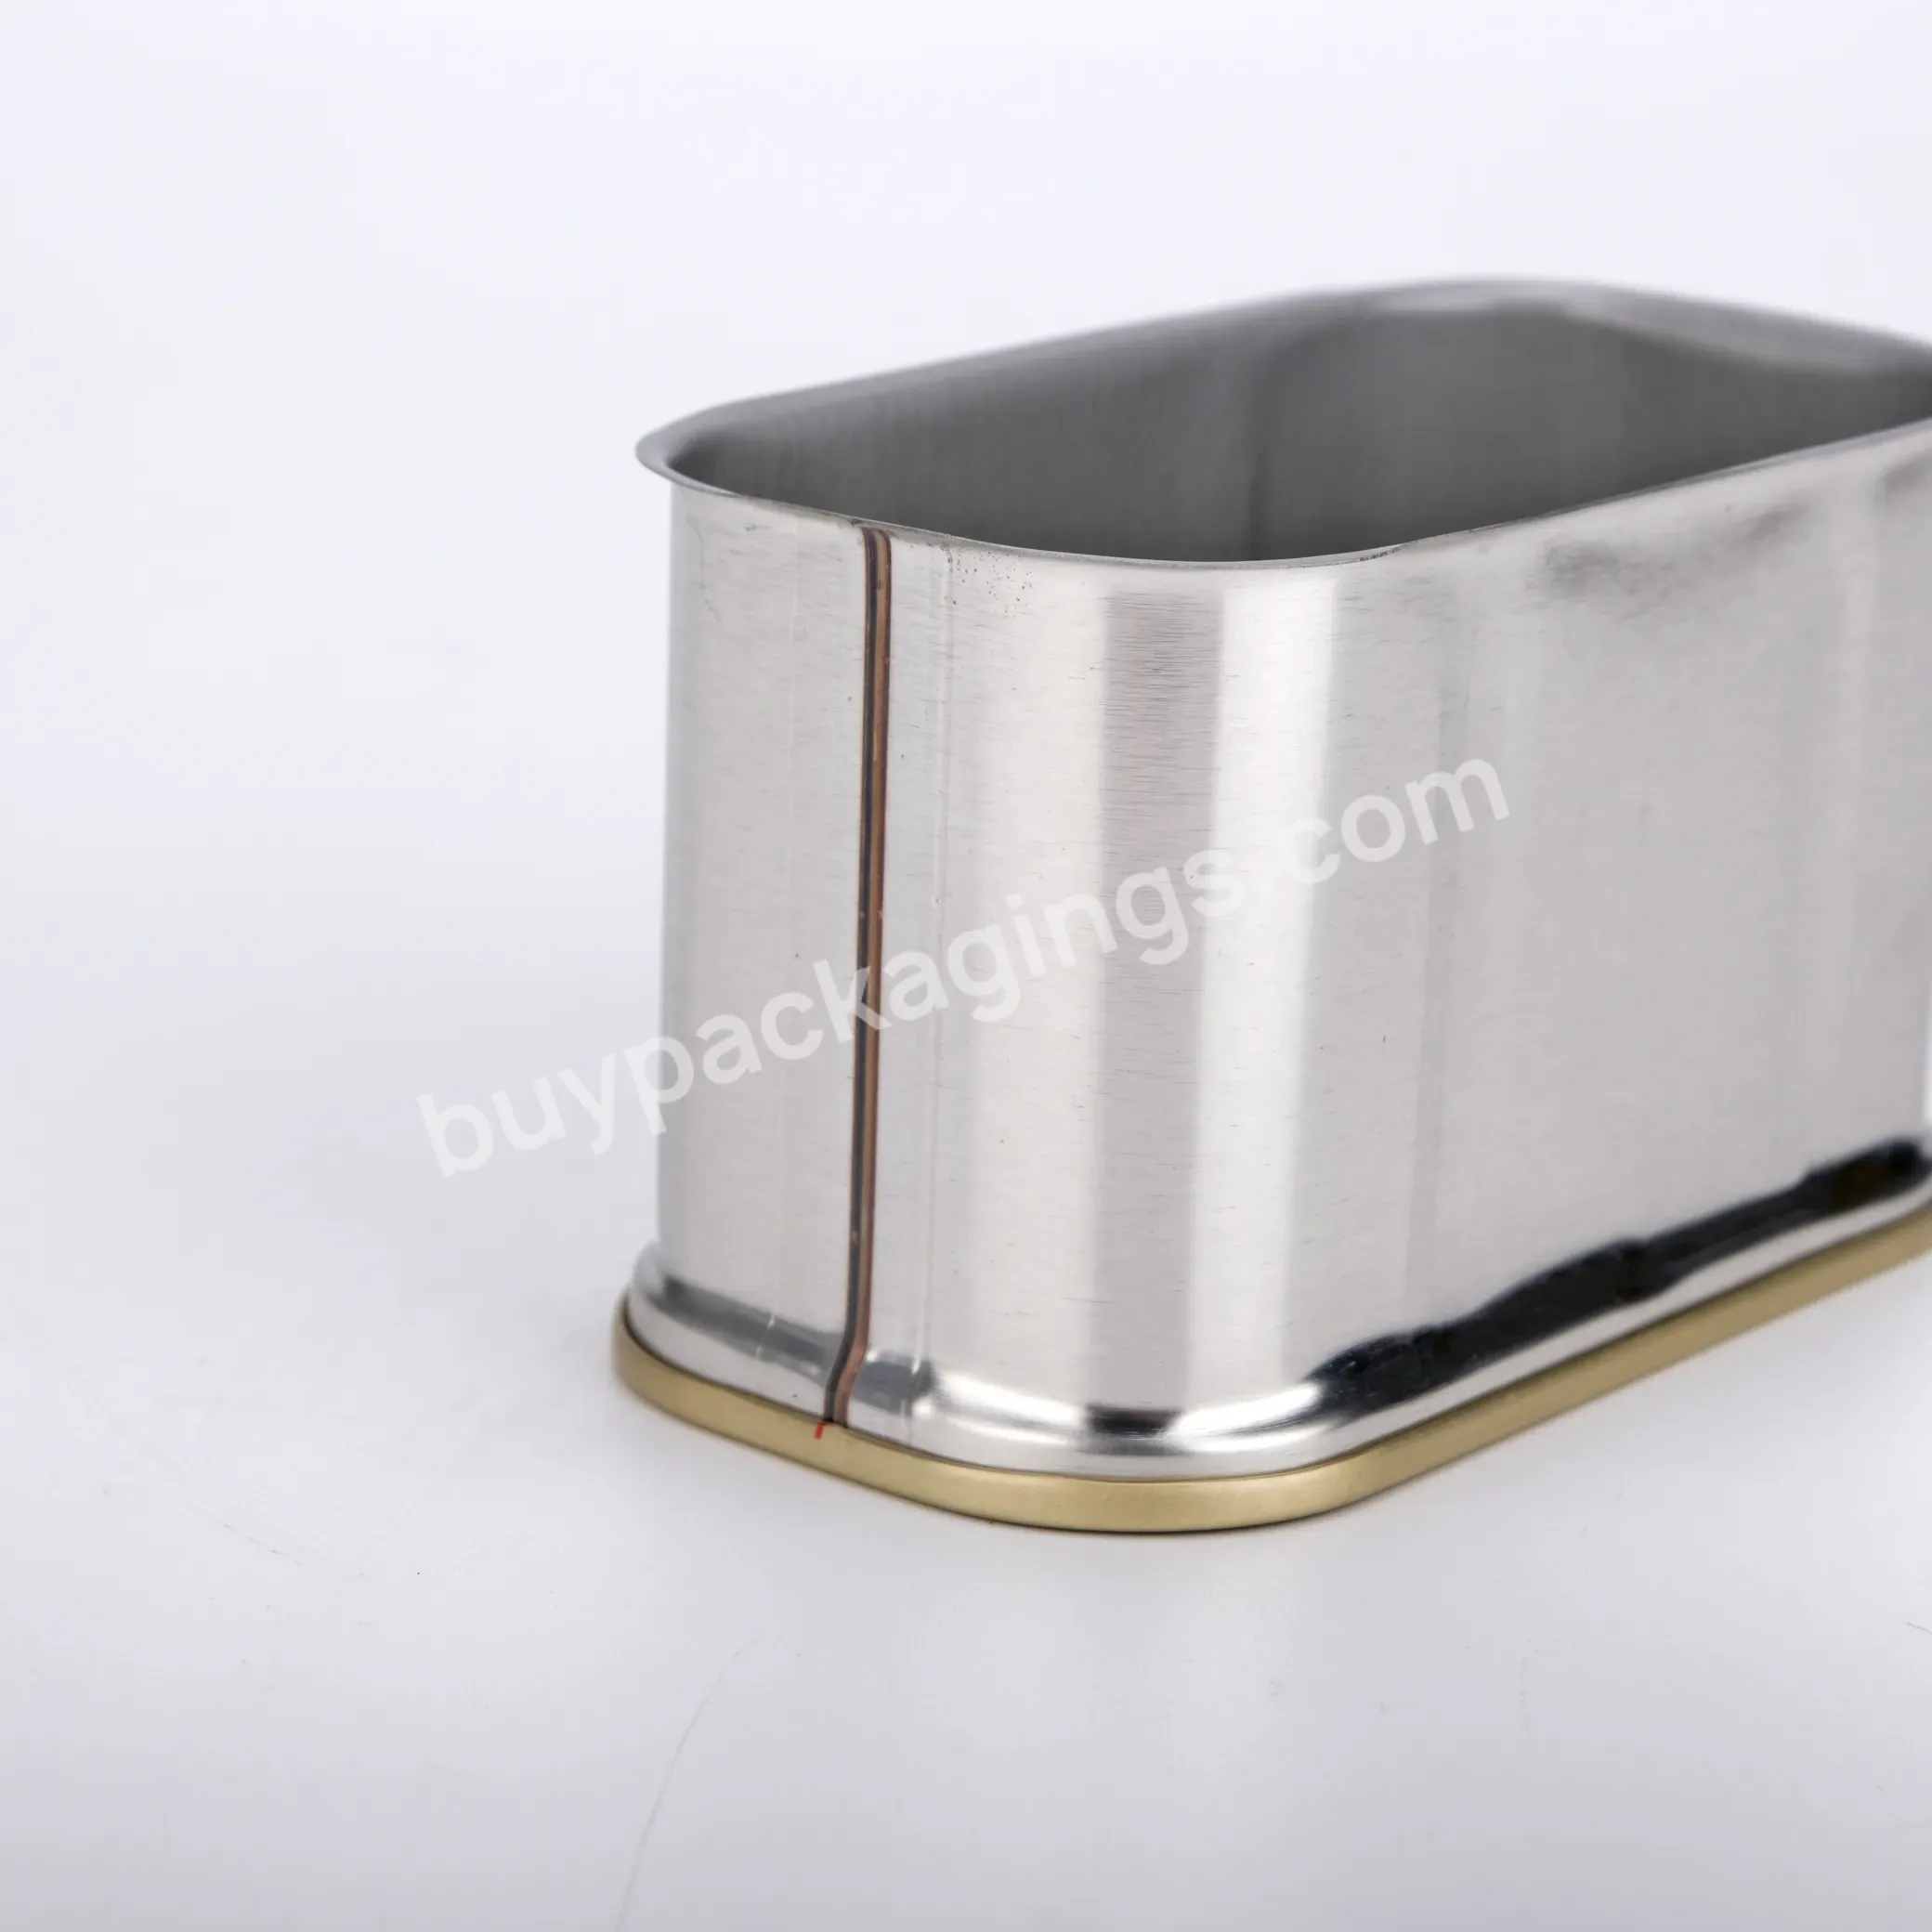 Food Grade Customized Canned Pork Lunch Meatfood Packaging Cans